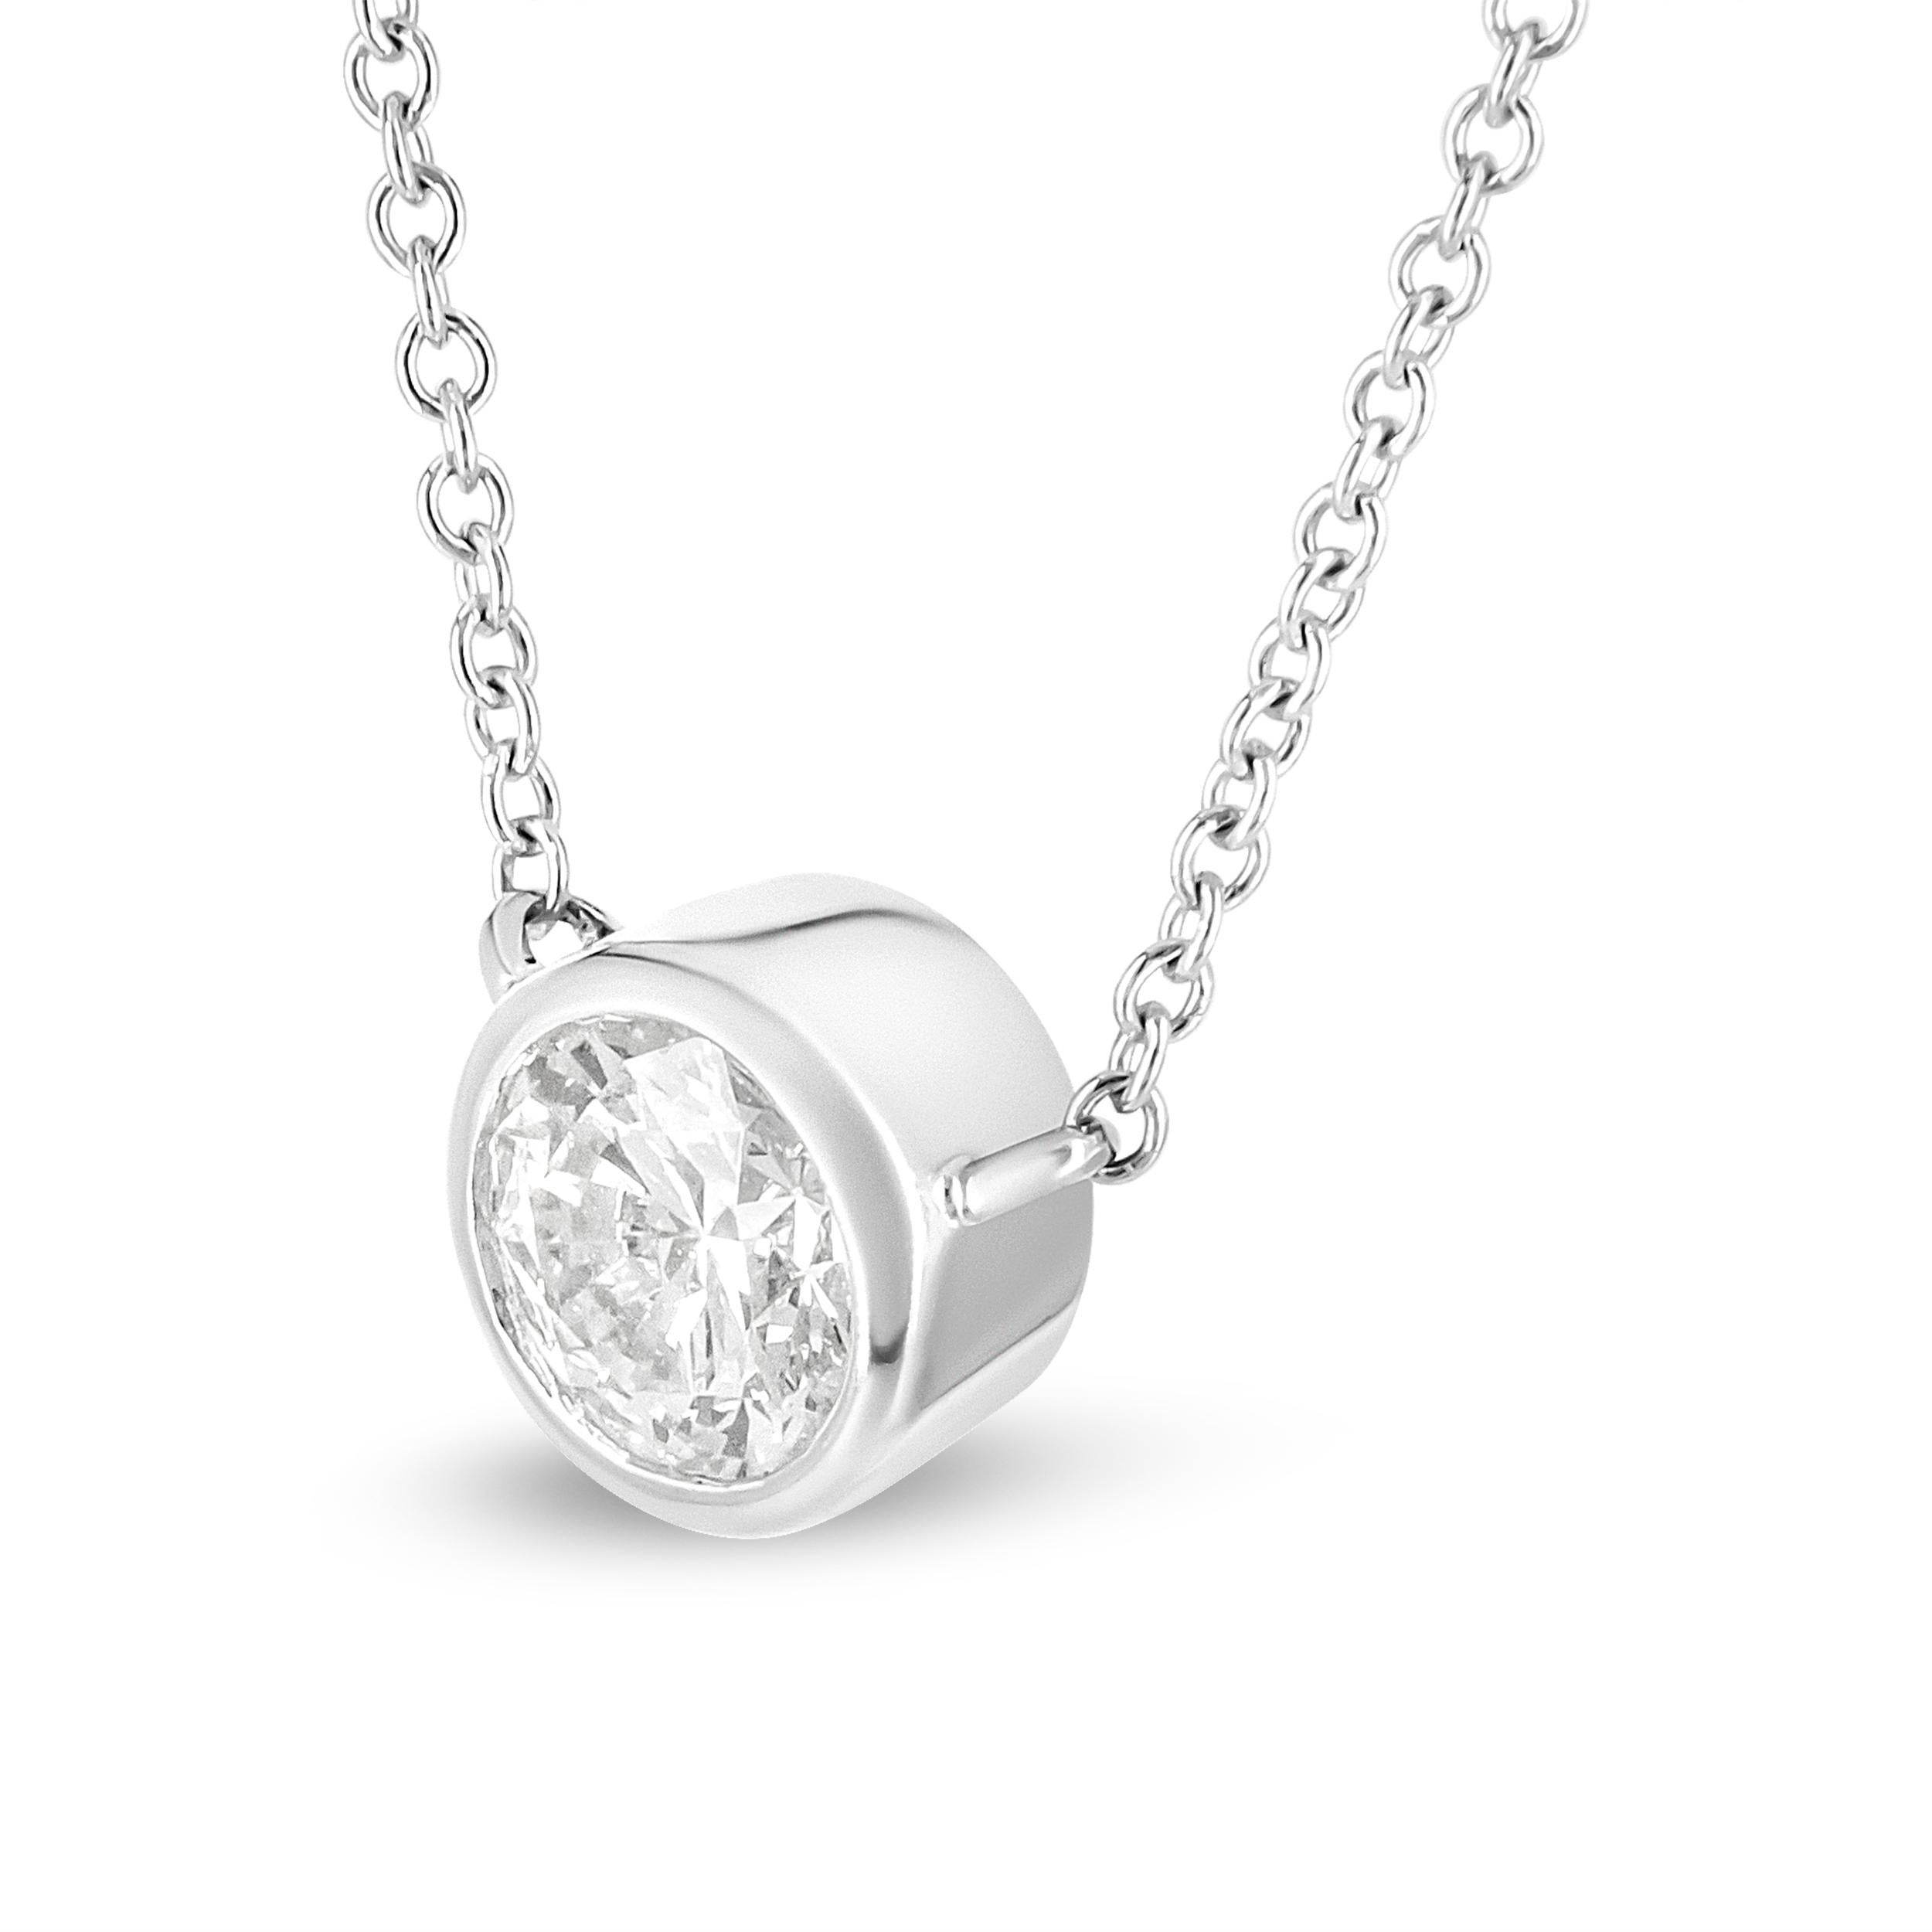 A secure bezel setting enhances the beauty of this 10k white gold solitaire diamond pendant necklace to give the appearance that it floats on the chain. This stunning round diamond is 1/3 cttw with an approximate I-J Color and I1-I2 Clarity. The